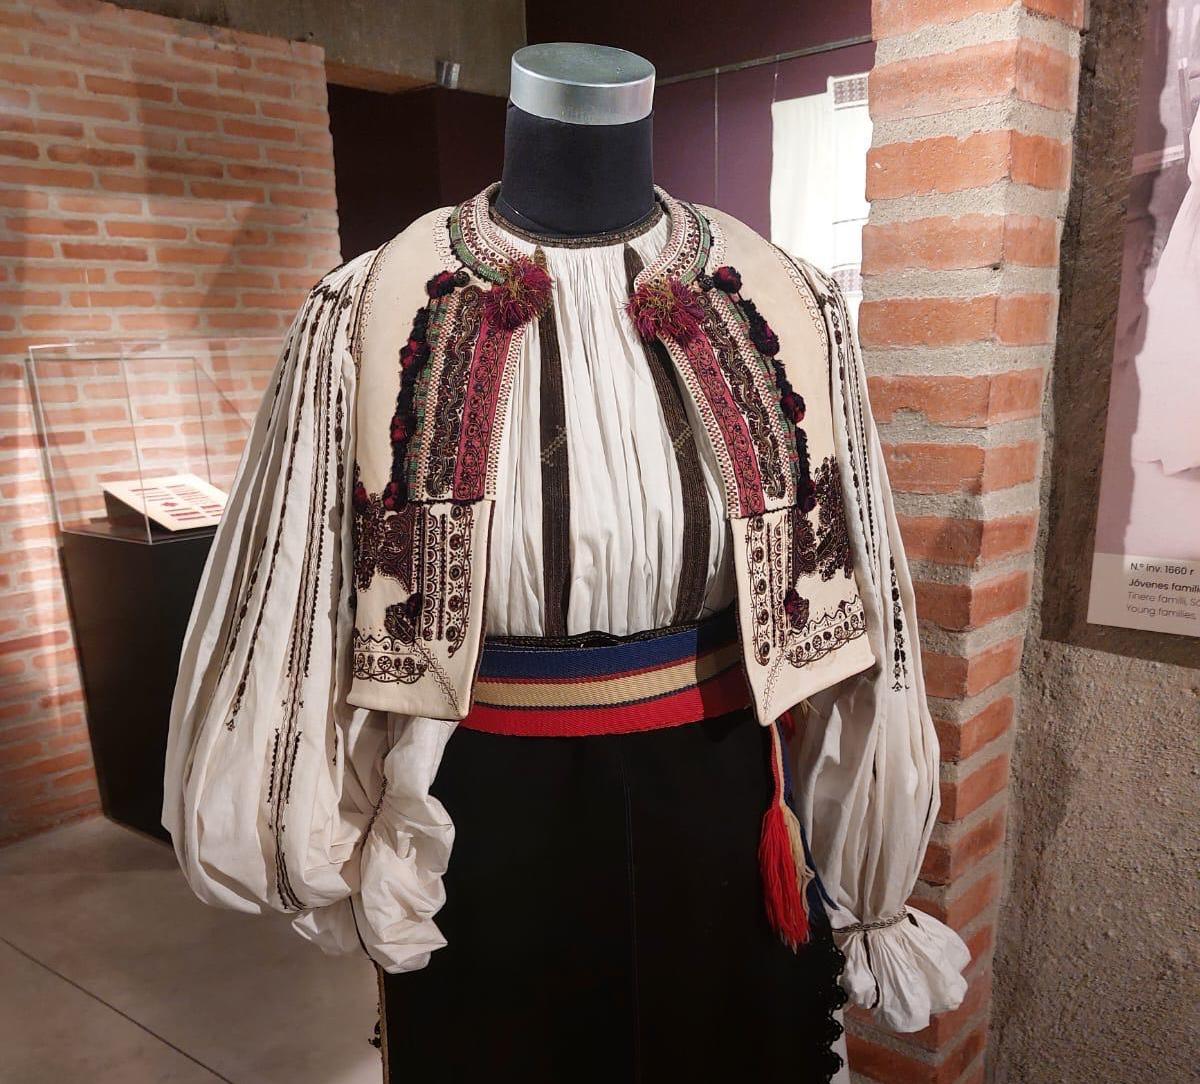 Traditional costumes and shirts from Romania’s national heritage, on display in Madrid